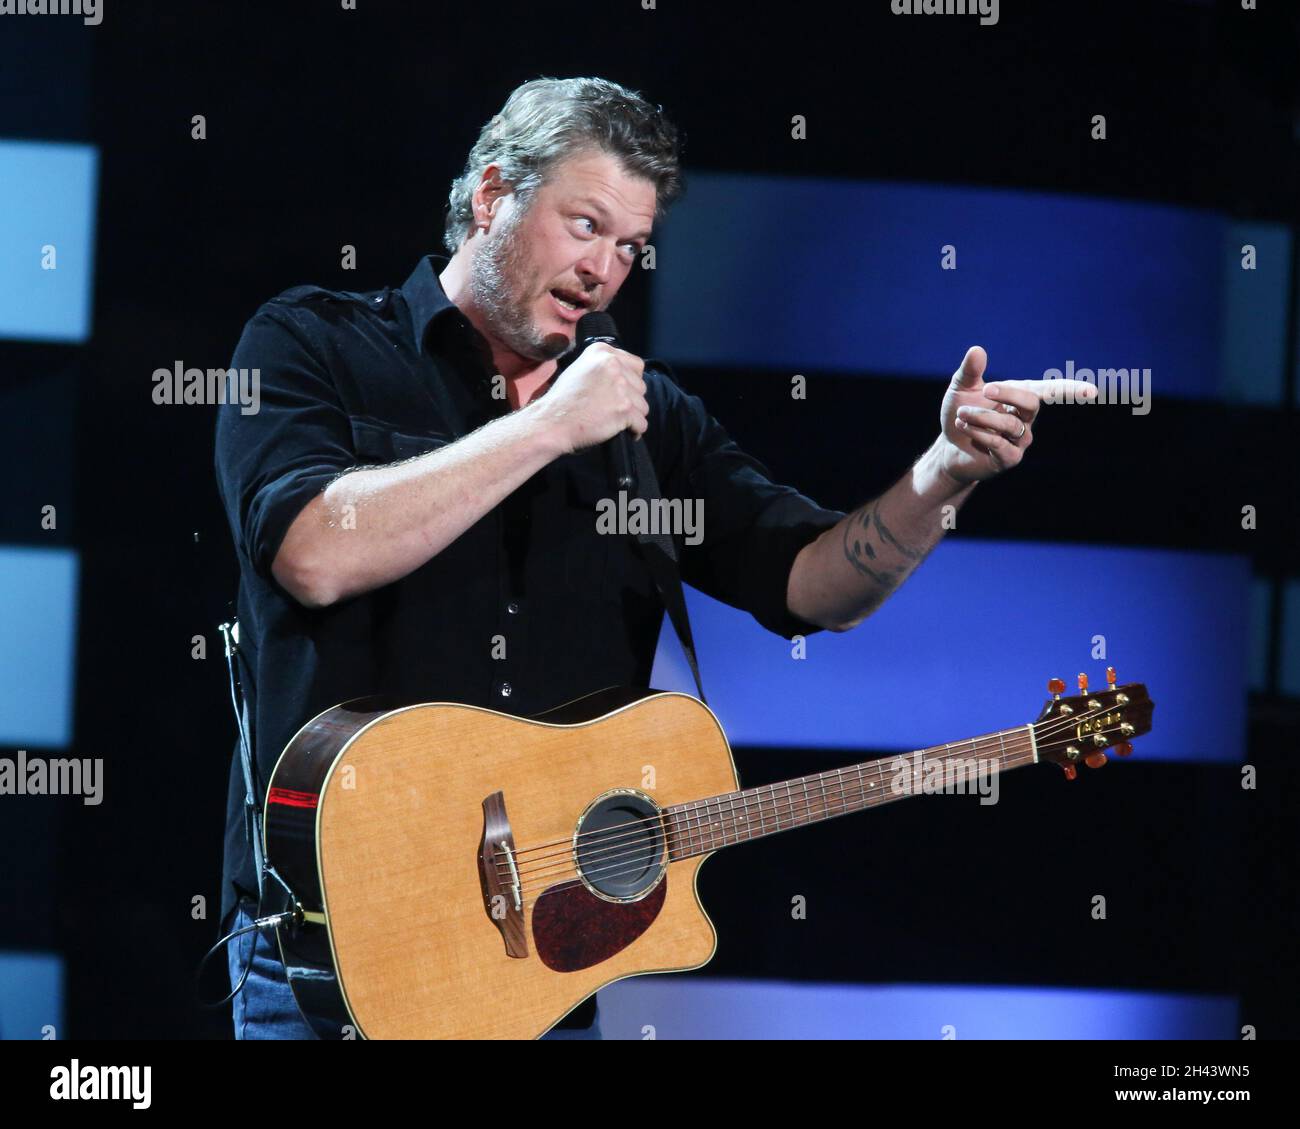 Austin, USA. 30th Oct, 2021. Blake Shelton performs at the iHeartCountry Festival at the Frank Erwin Center on Saturday, Oct. 30, 2021, in Austin, Texas. (Photo by Jack Plunkett/imageSPACE) Credit: Imagespace/Alamy Live News Stock Photo